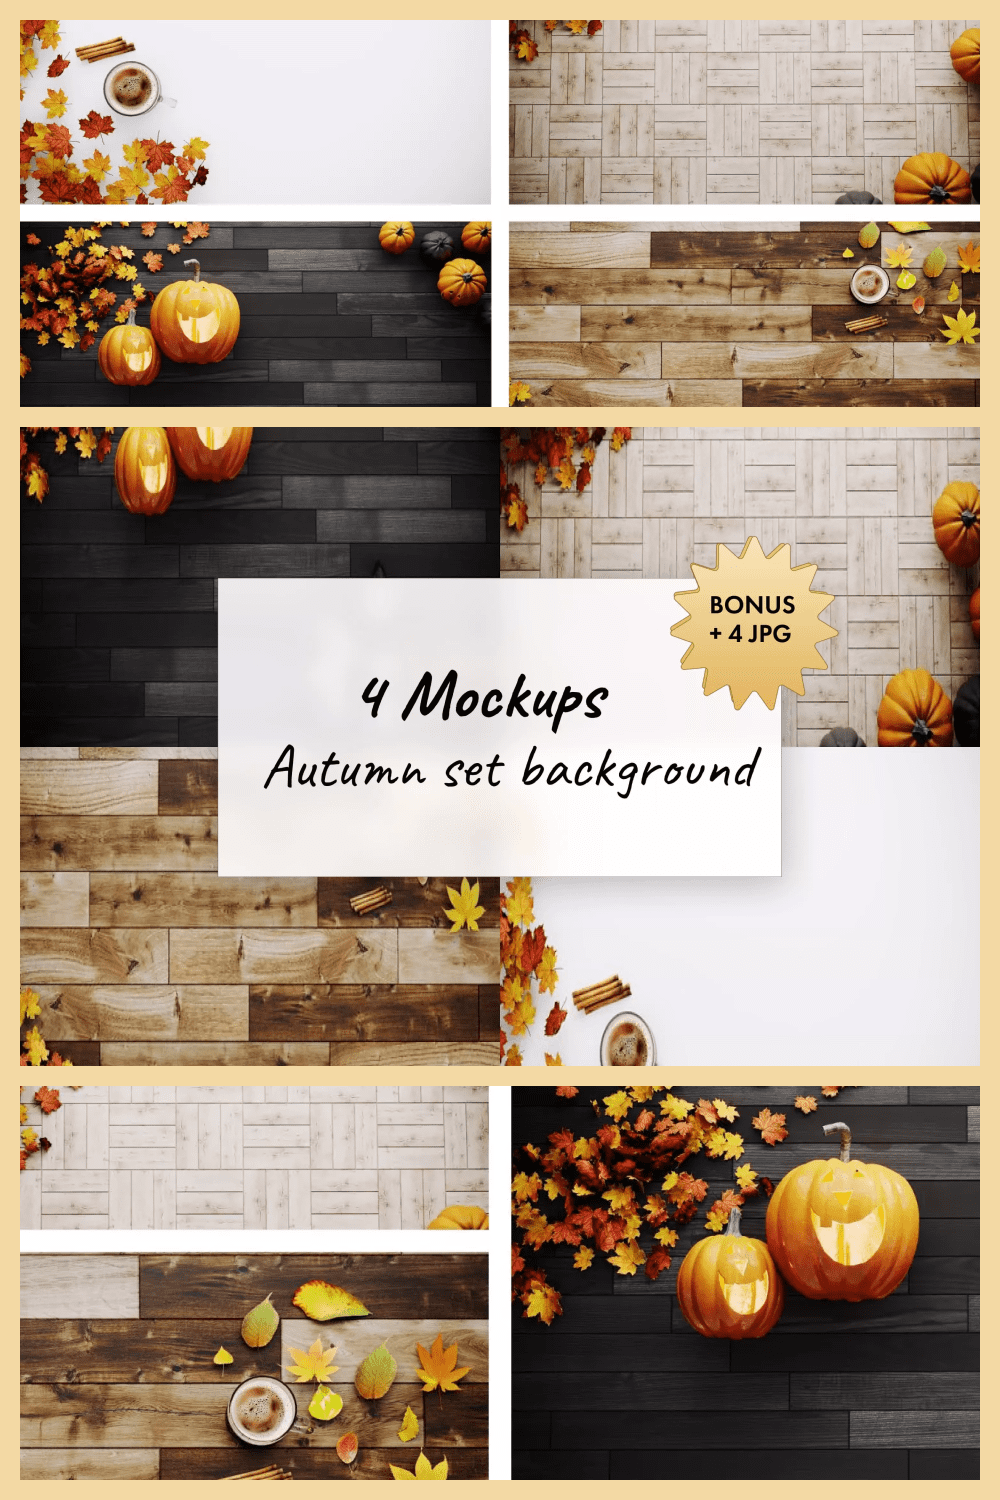 Collage of images of pumpkins and leaves on a parquet floor.